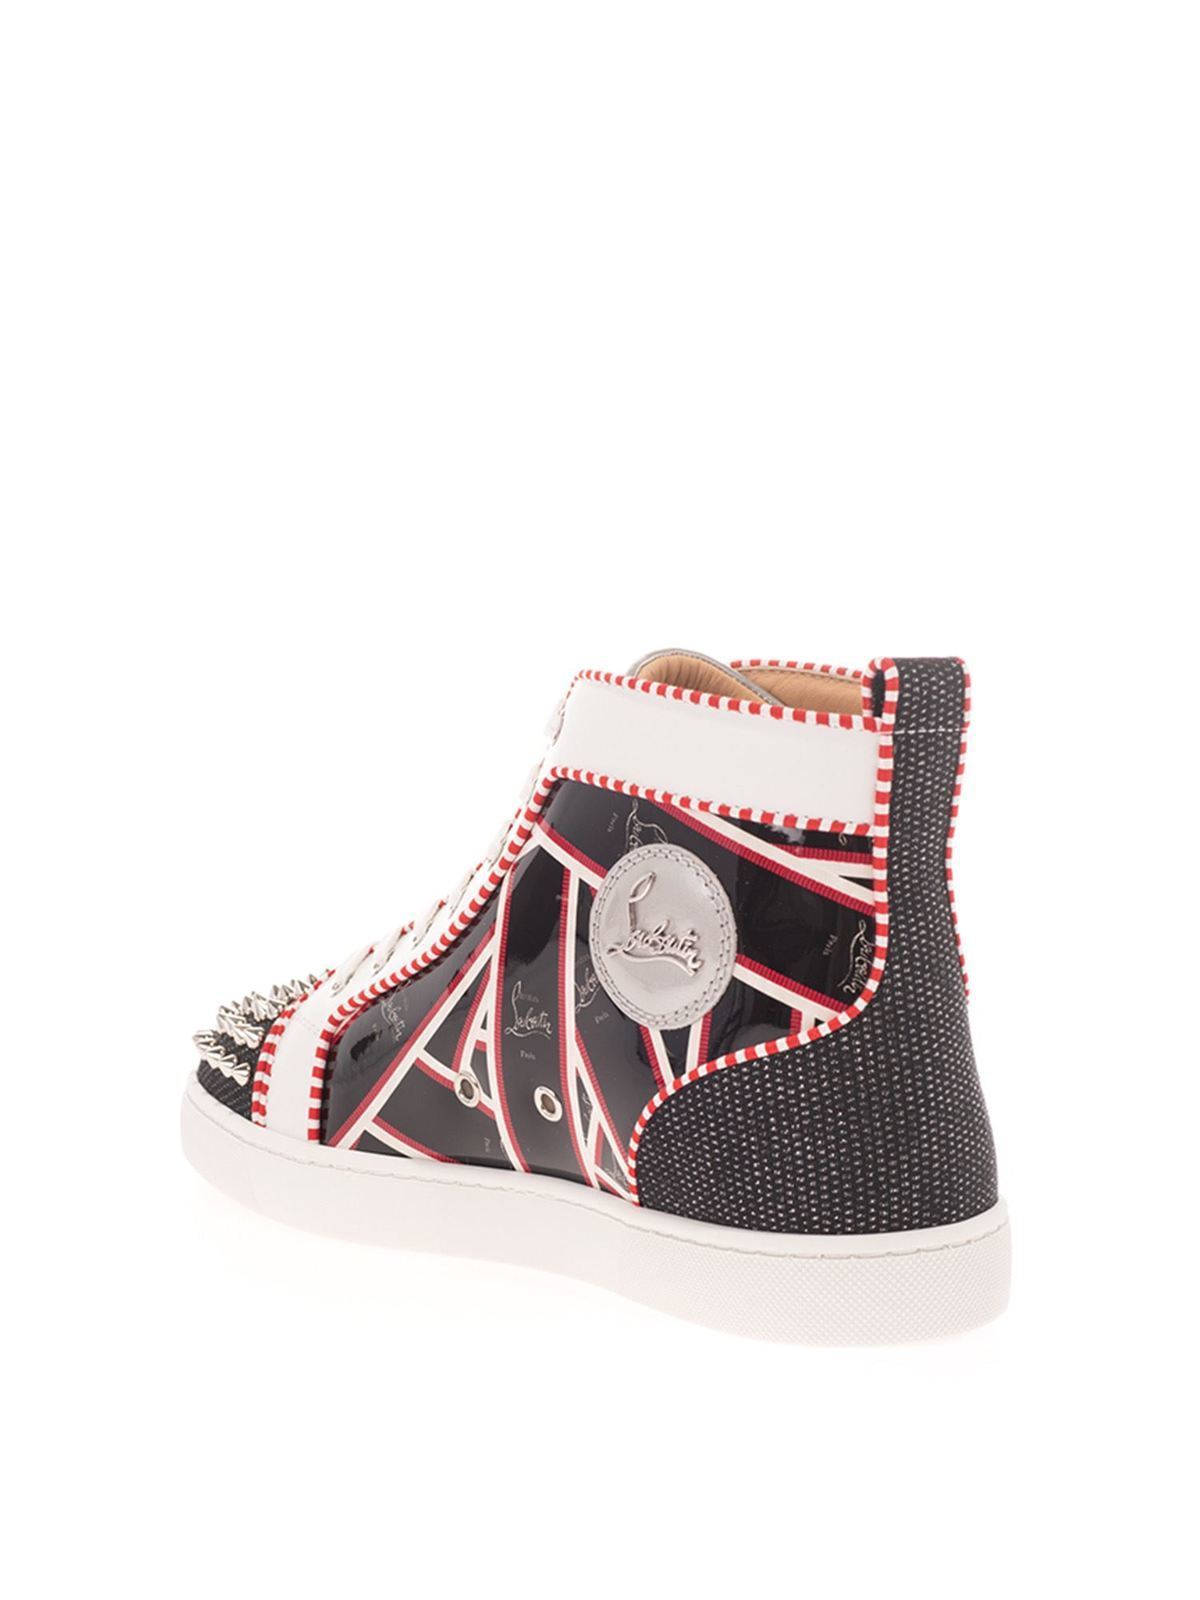 Christian Louboutin 'louis Spikes' Sneakers in Black